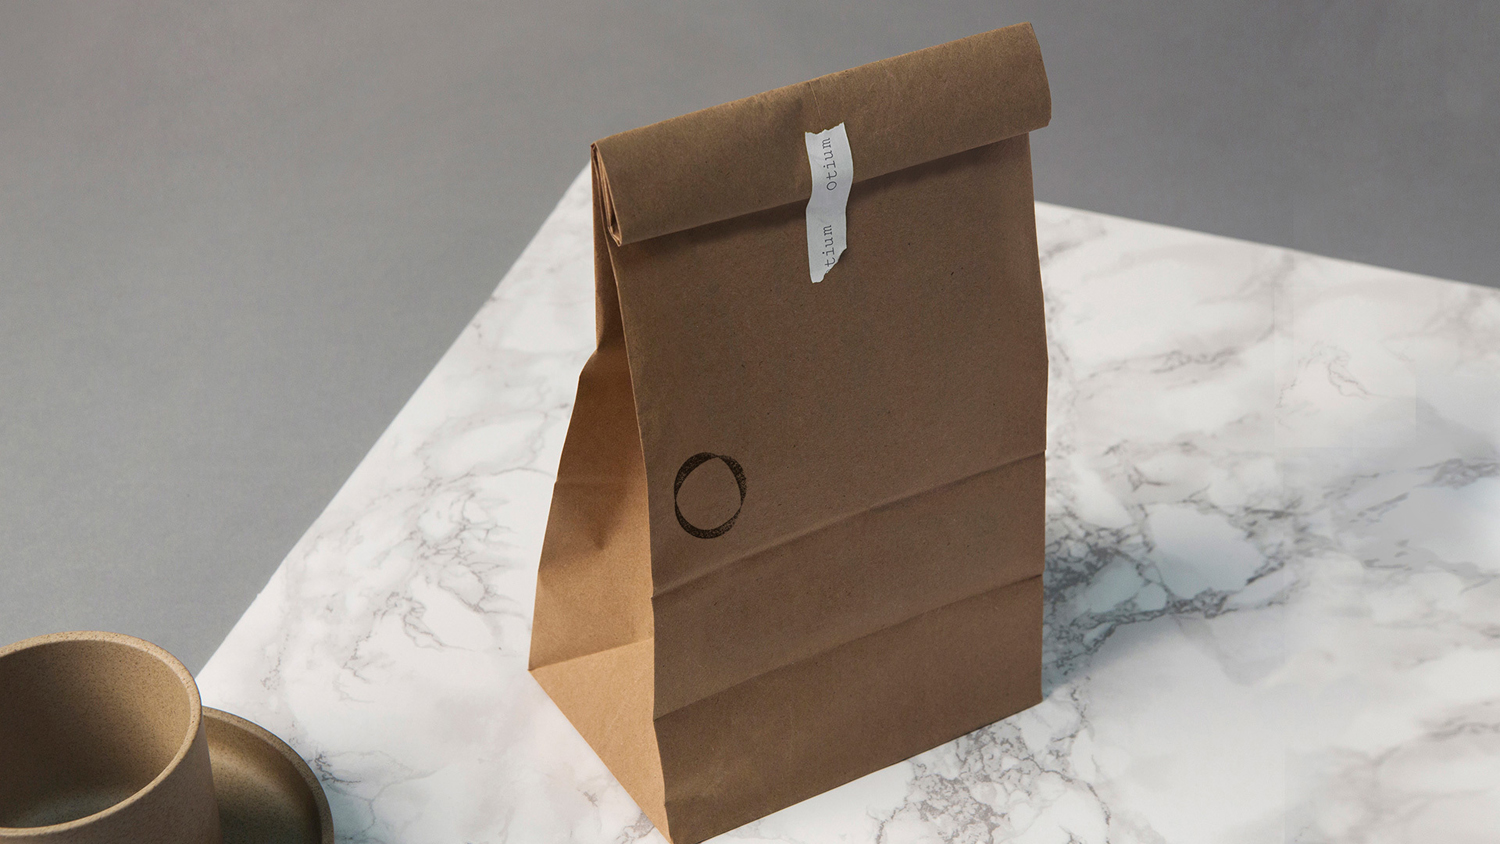 Brand identity and packaging by Sagmeister & Walsh for contemporary restaurant Otium